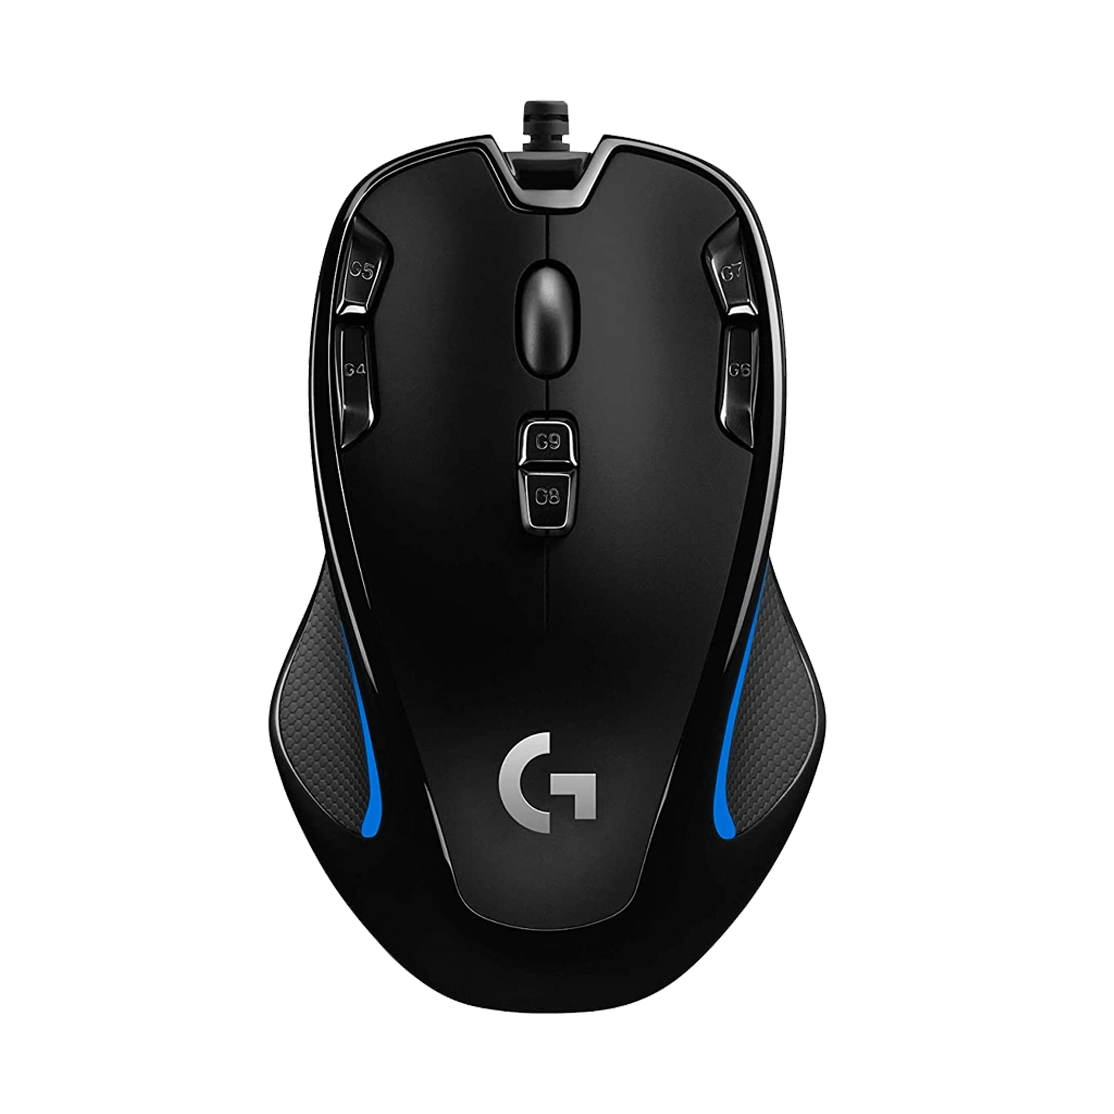 Logitech Gaming USB Mouse G300s